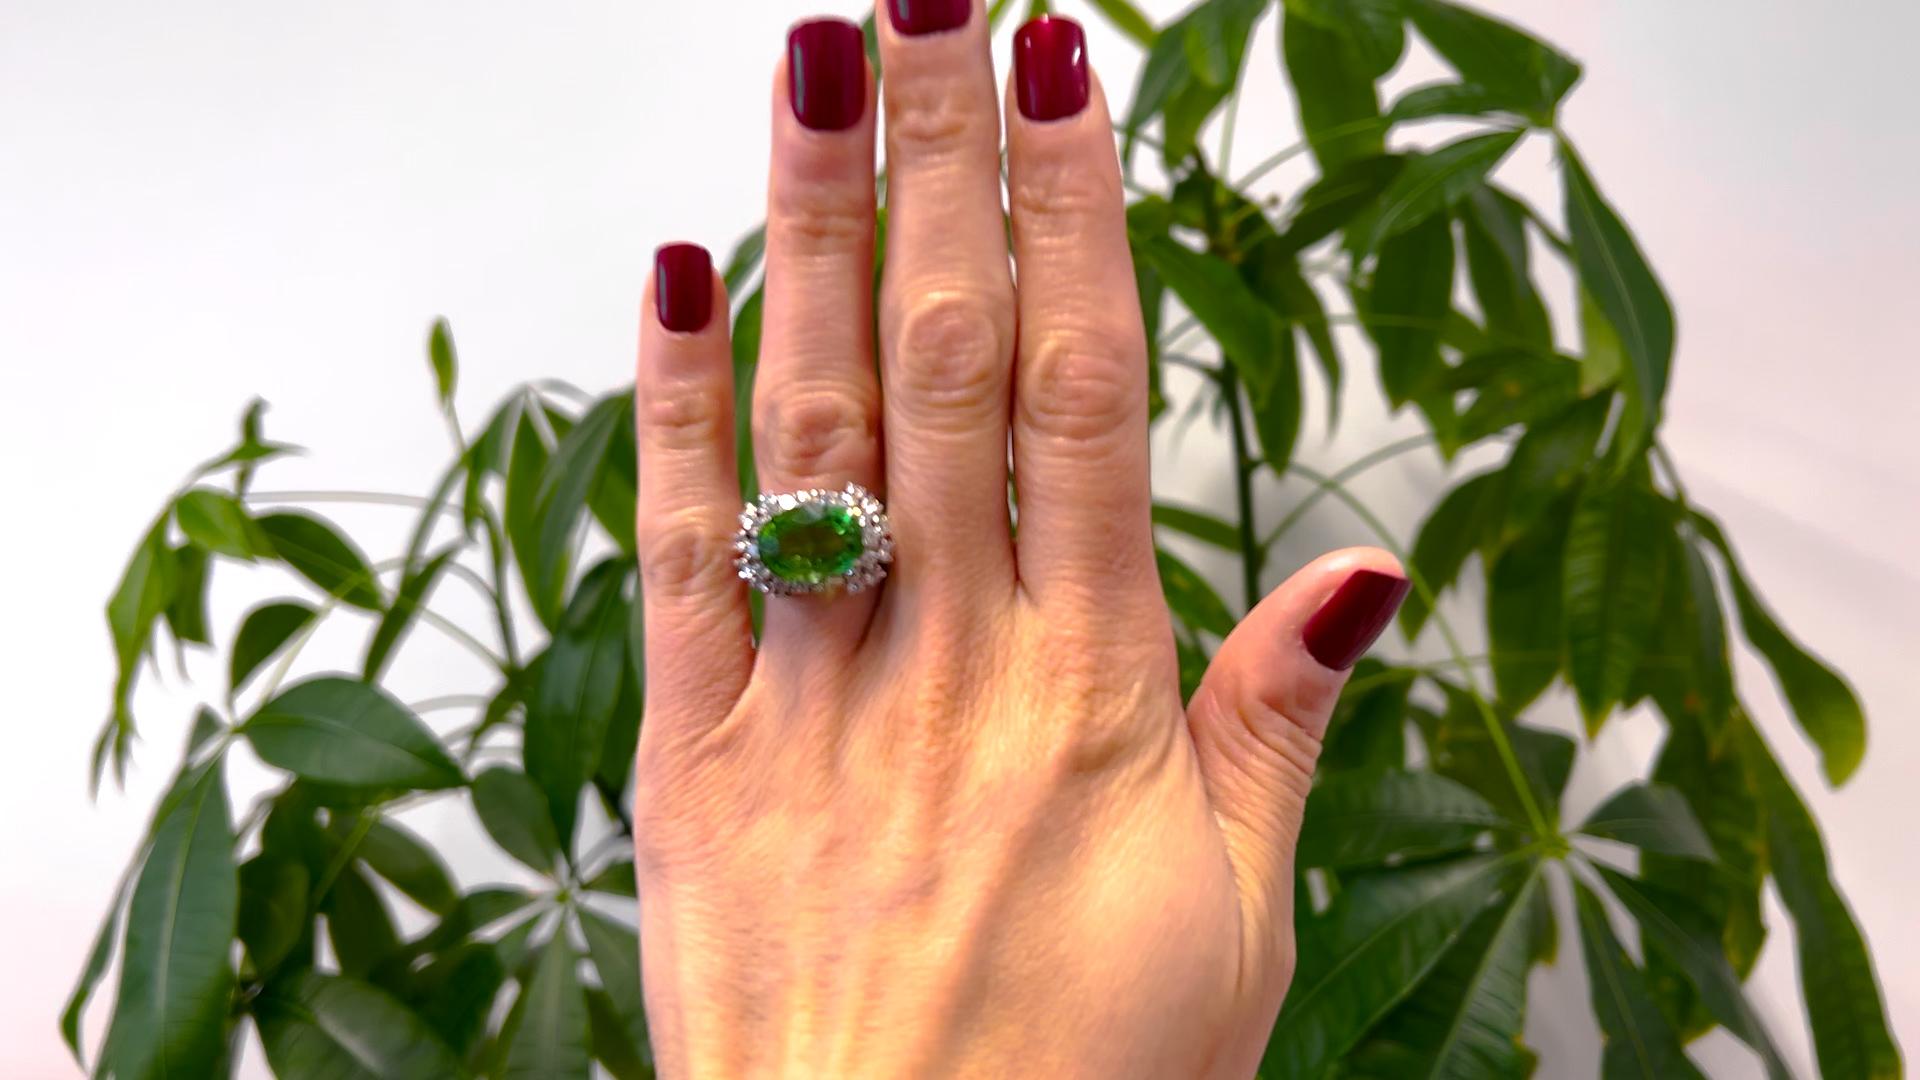 One Mid Century Tourmaline Diamond 18k White Gold Cocktail Ring. Featuring one oval mixed cut green tourmaline weighing approximately 6.70 carats. Accented by 28 transitional cut diamonds with a total weight of approximately 1.45 carats, graded F-G